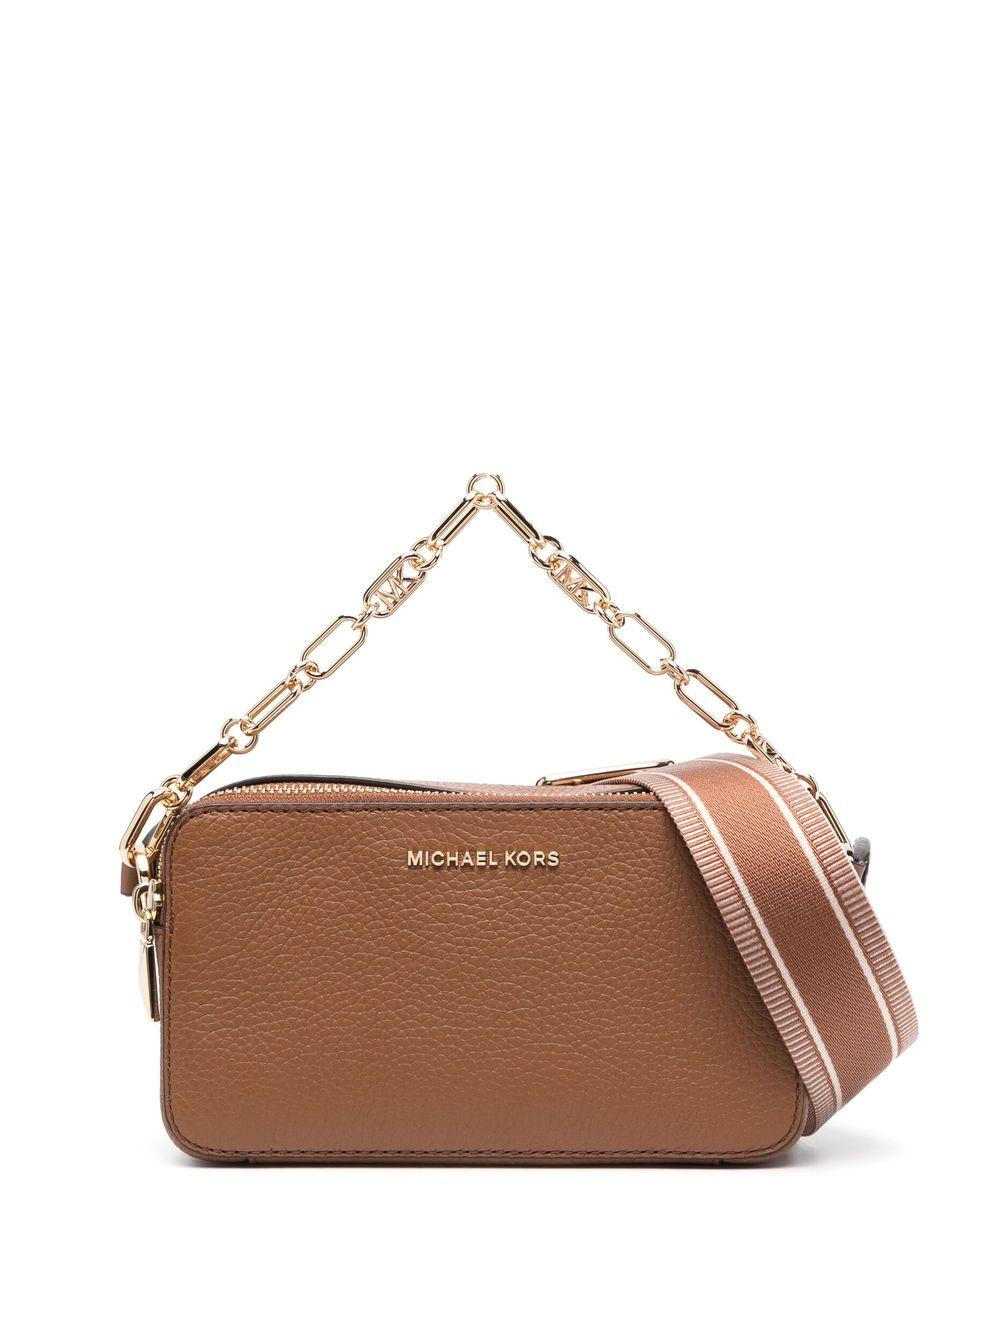 Michael Kors Small Leather Crossbody Bag in Brown